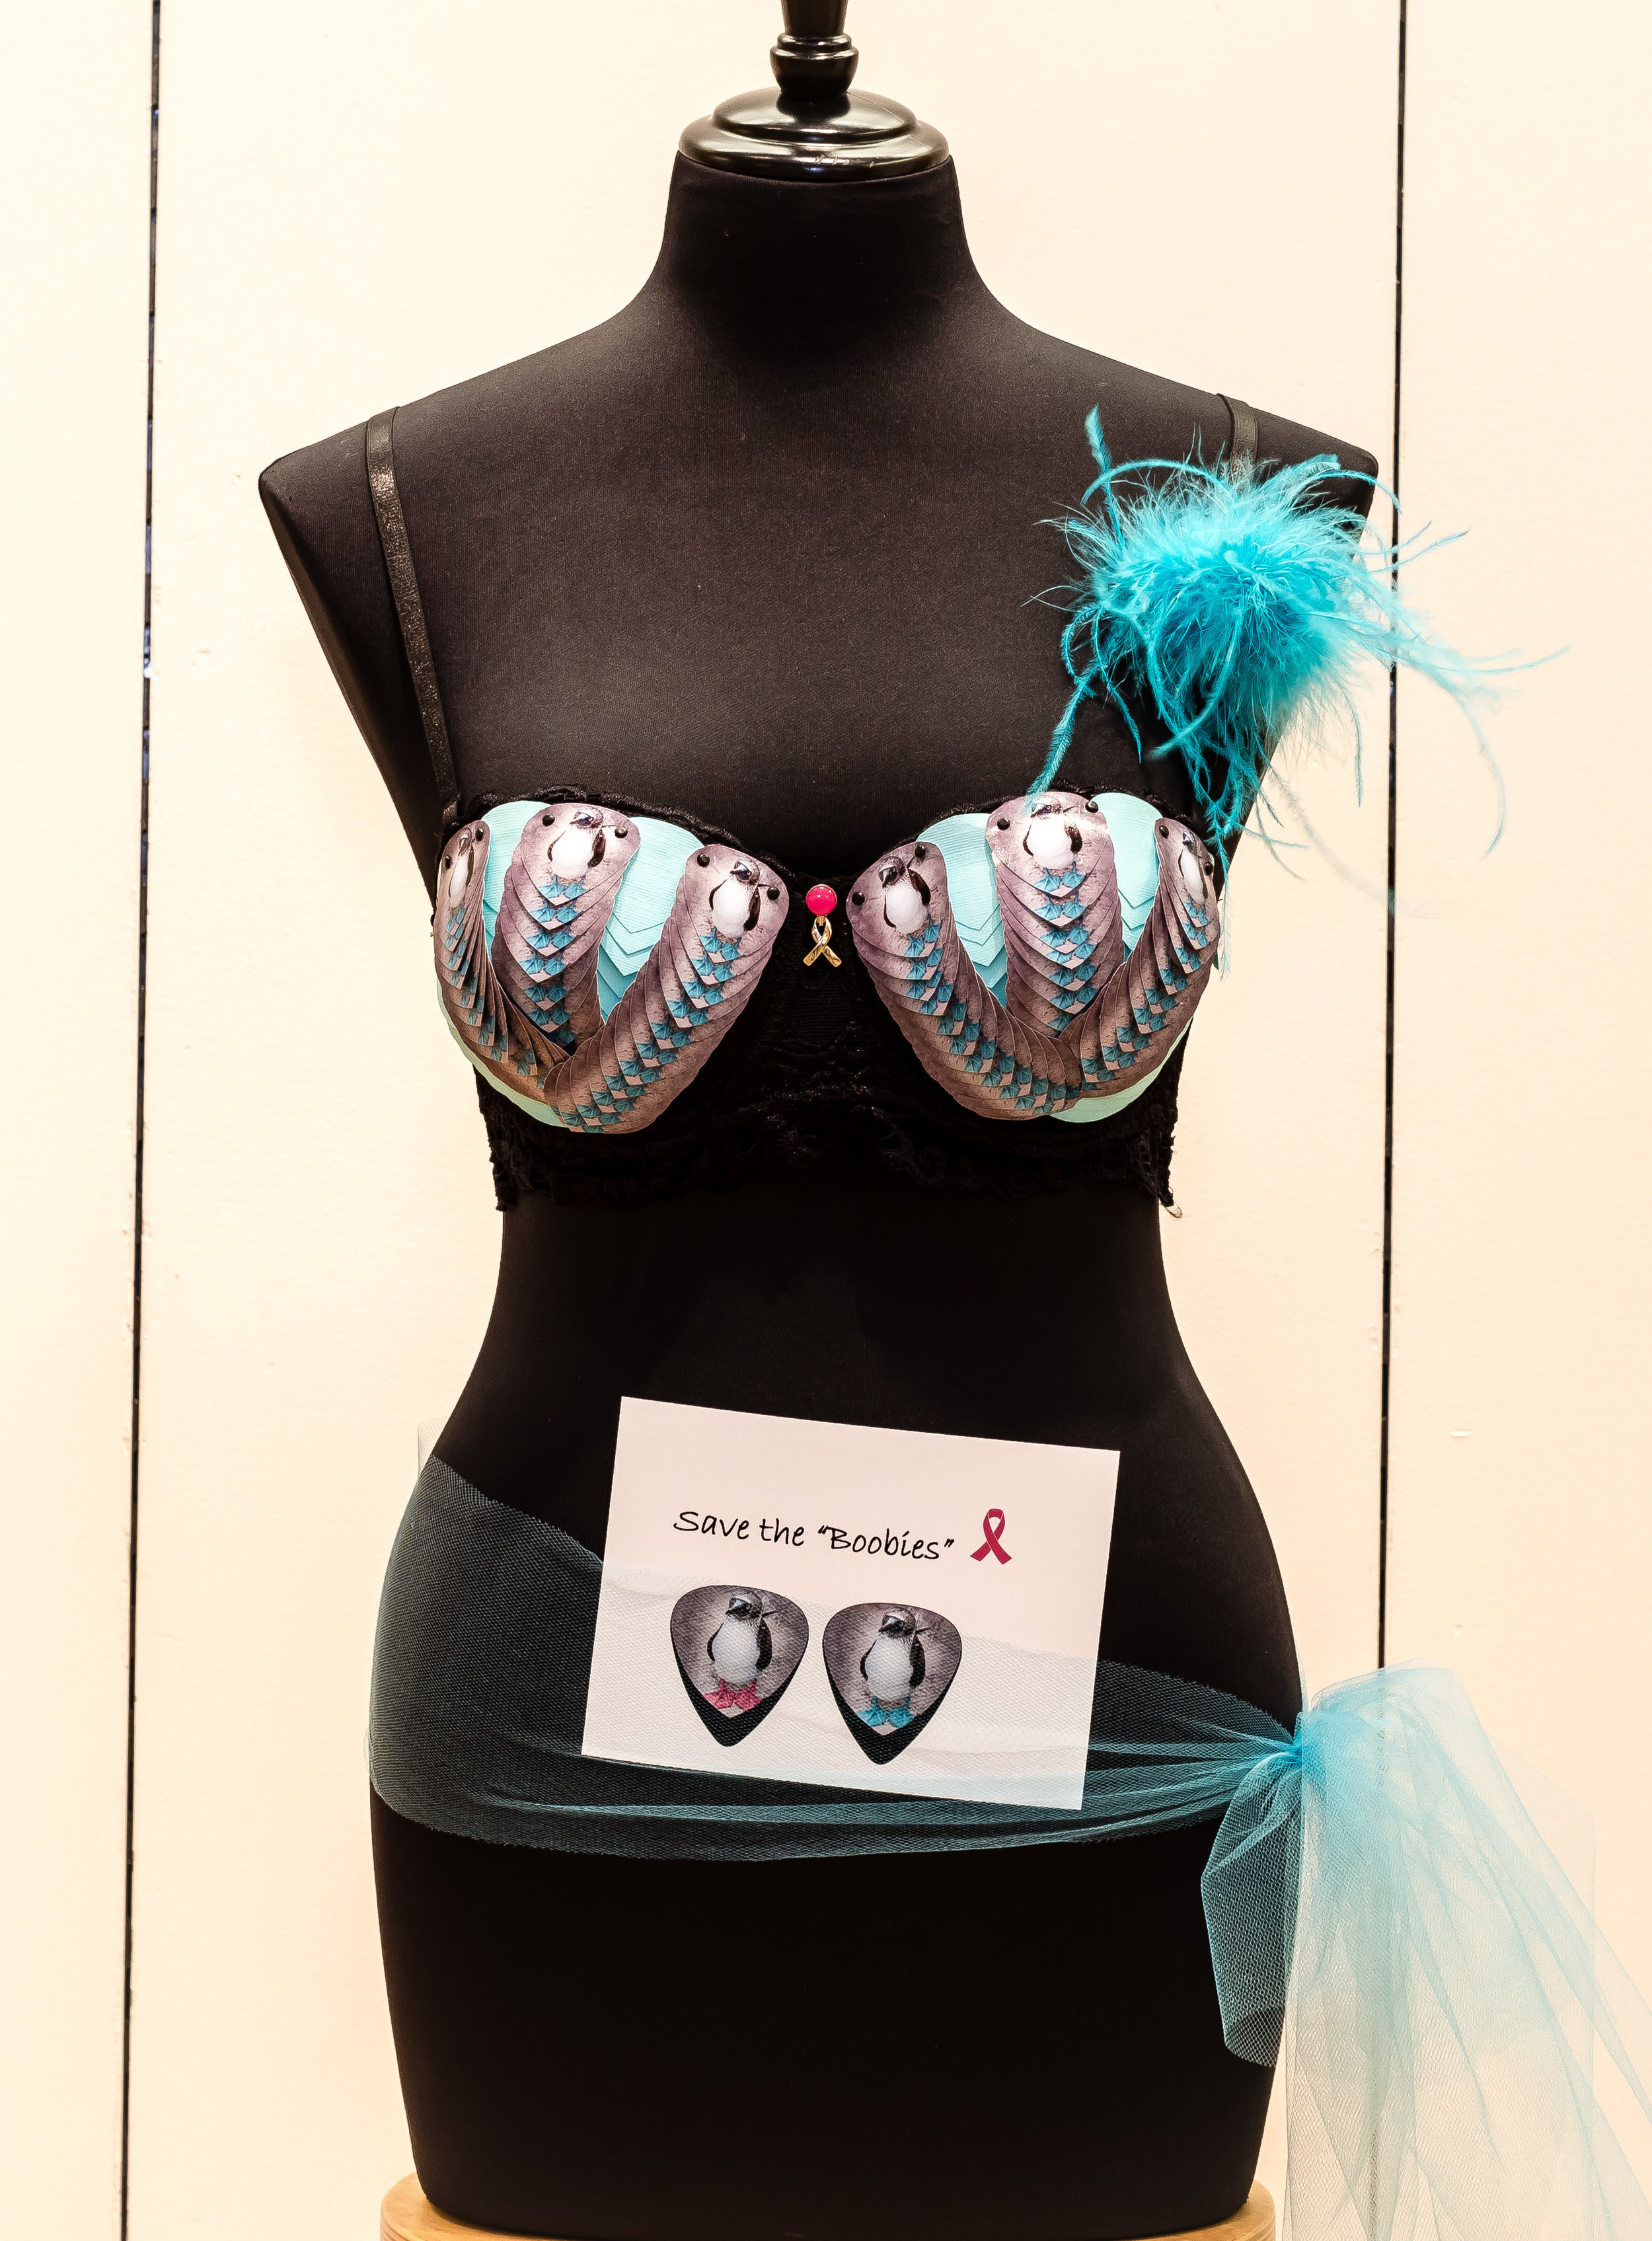 Bra Art Archive — Bras for the Cause